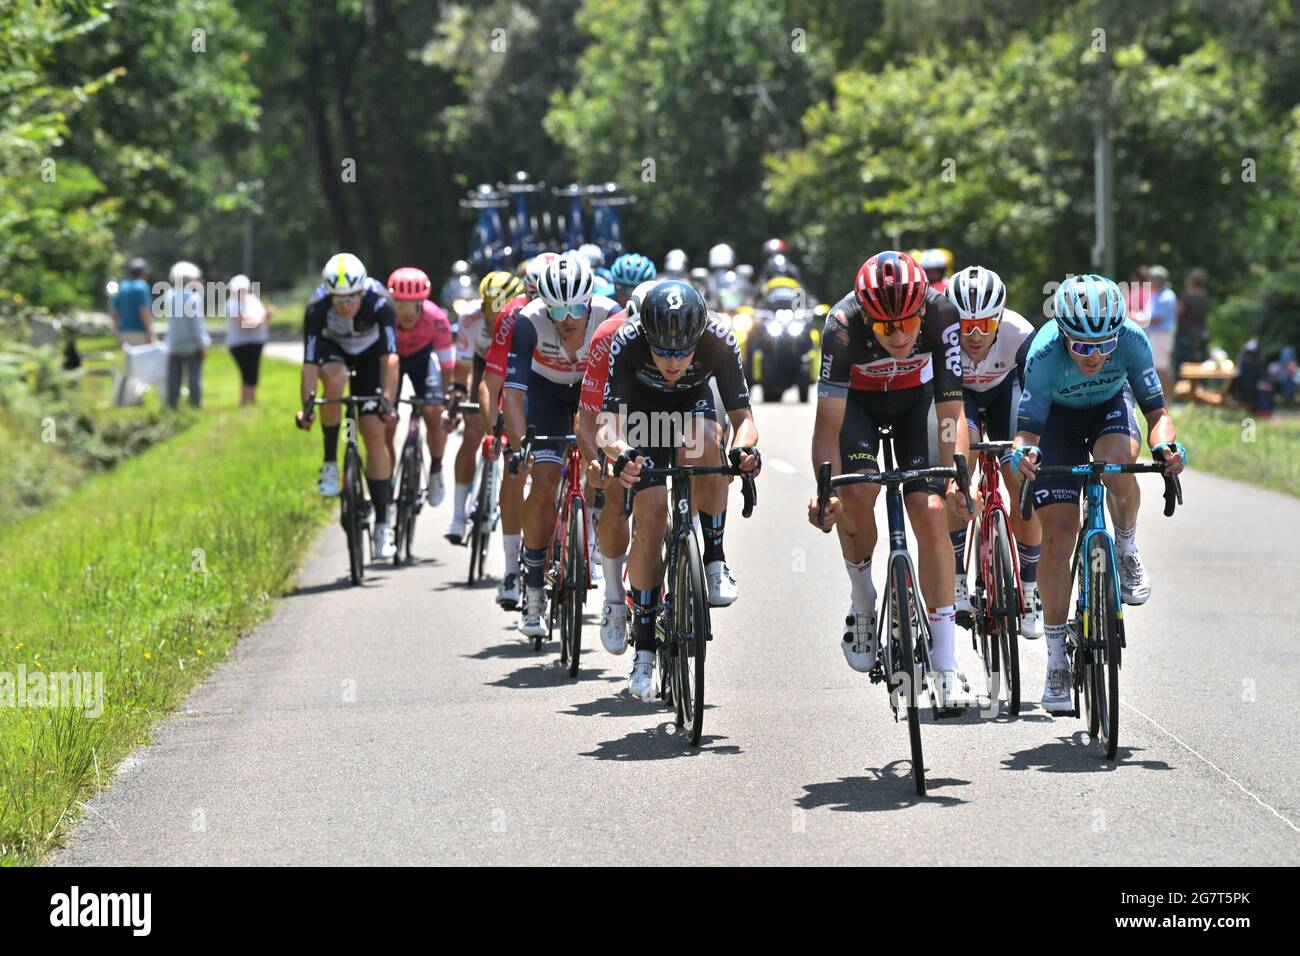 Riders pictured in action during stage 19 of the 108th edition of the Tour de France cycling race, from Mourenx to Libourne (207 km) in France, Friday Stock Photo